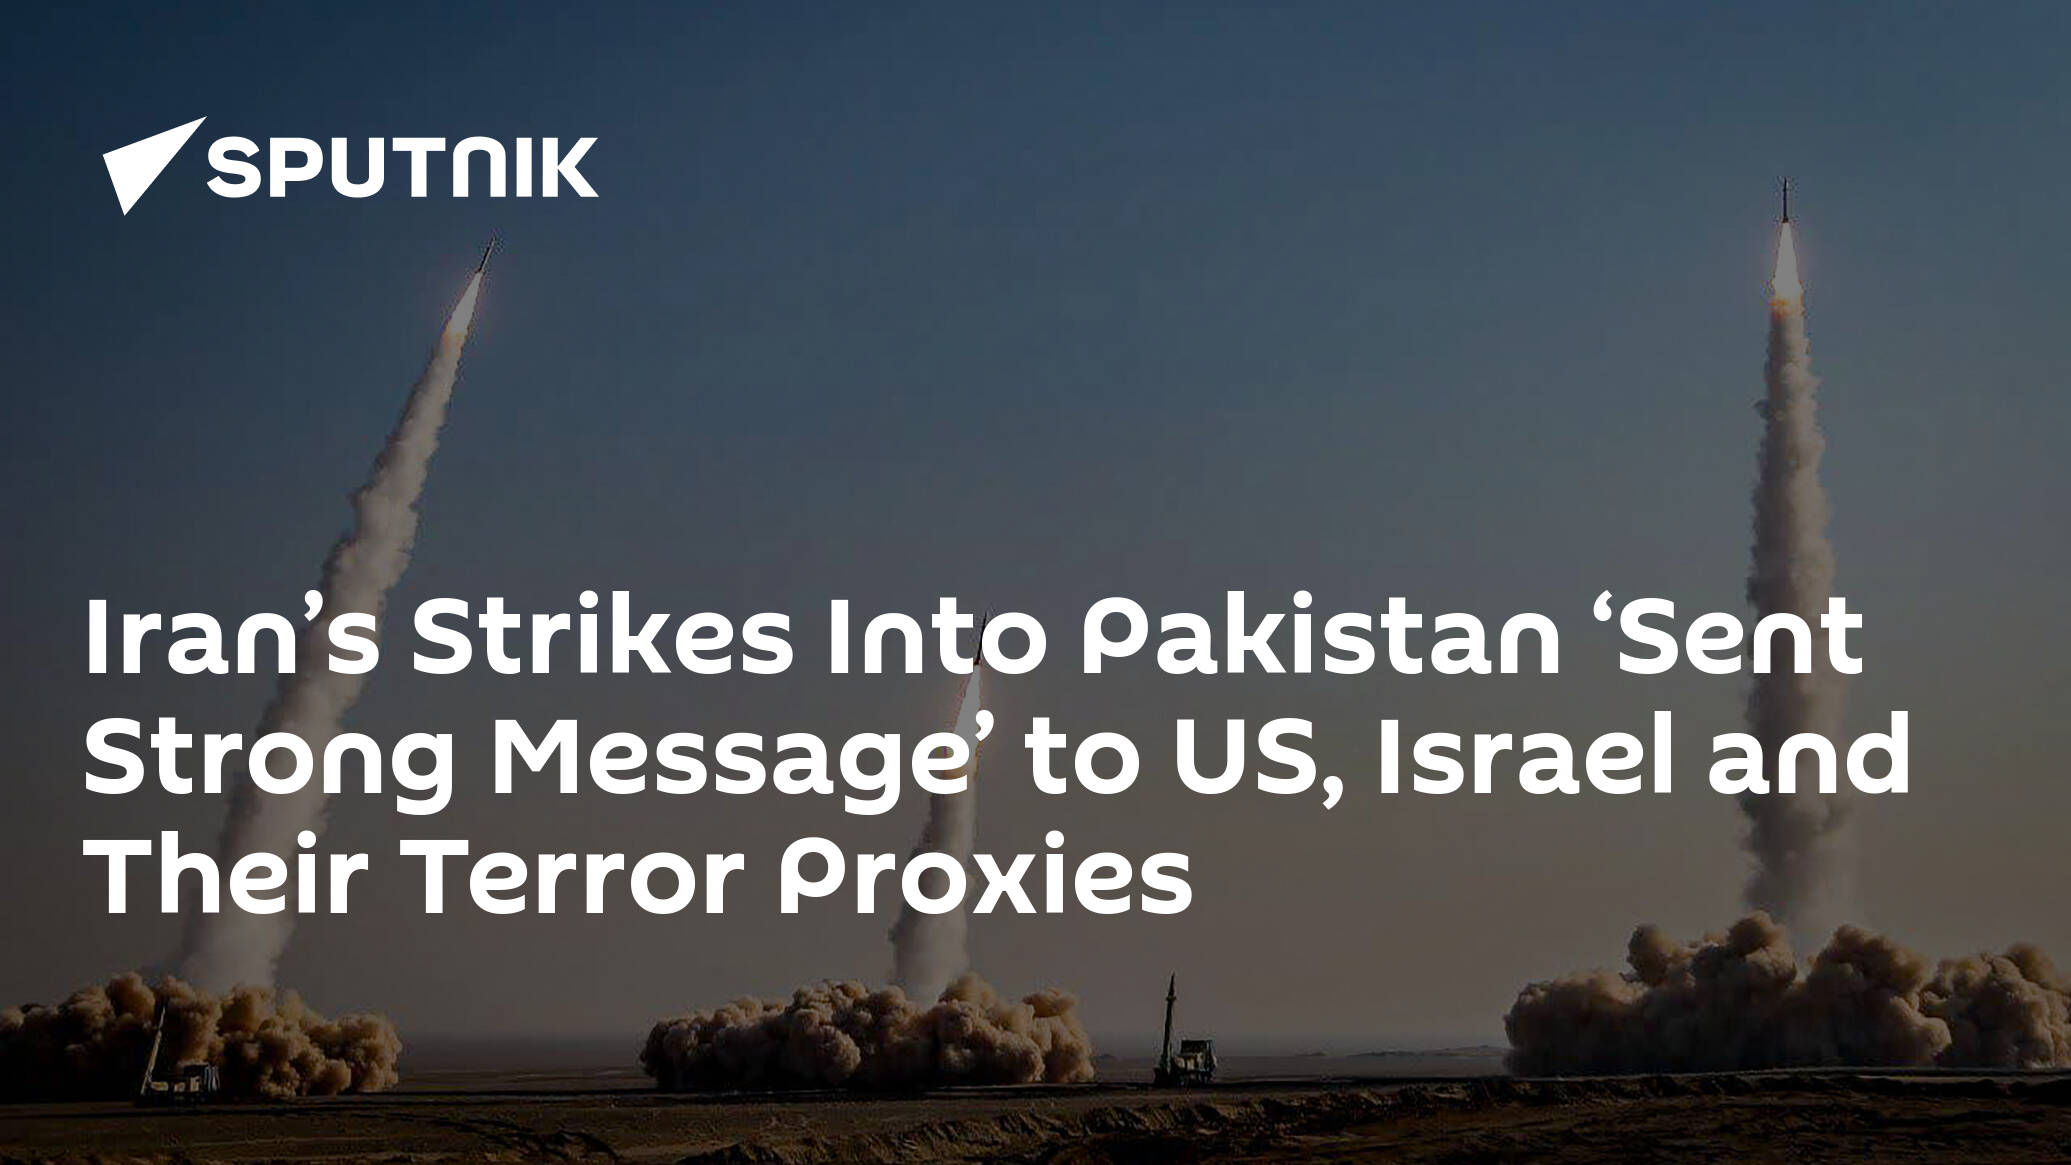 Iran’s Strikes Into Pakistan ‘Sent Strong Message’ to US, Israel and Their Terror Proxies